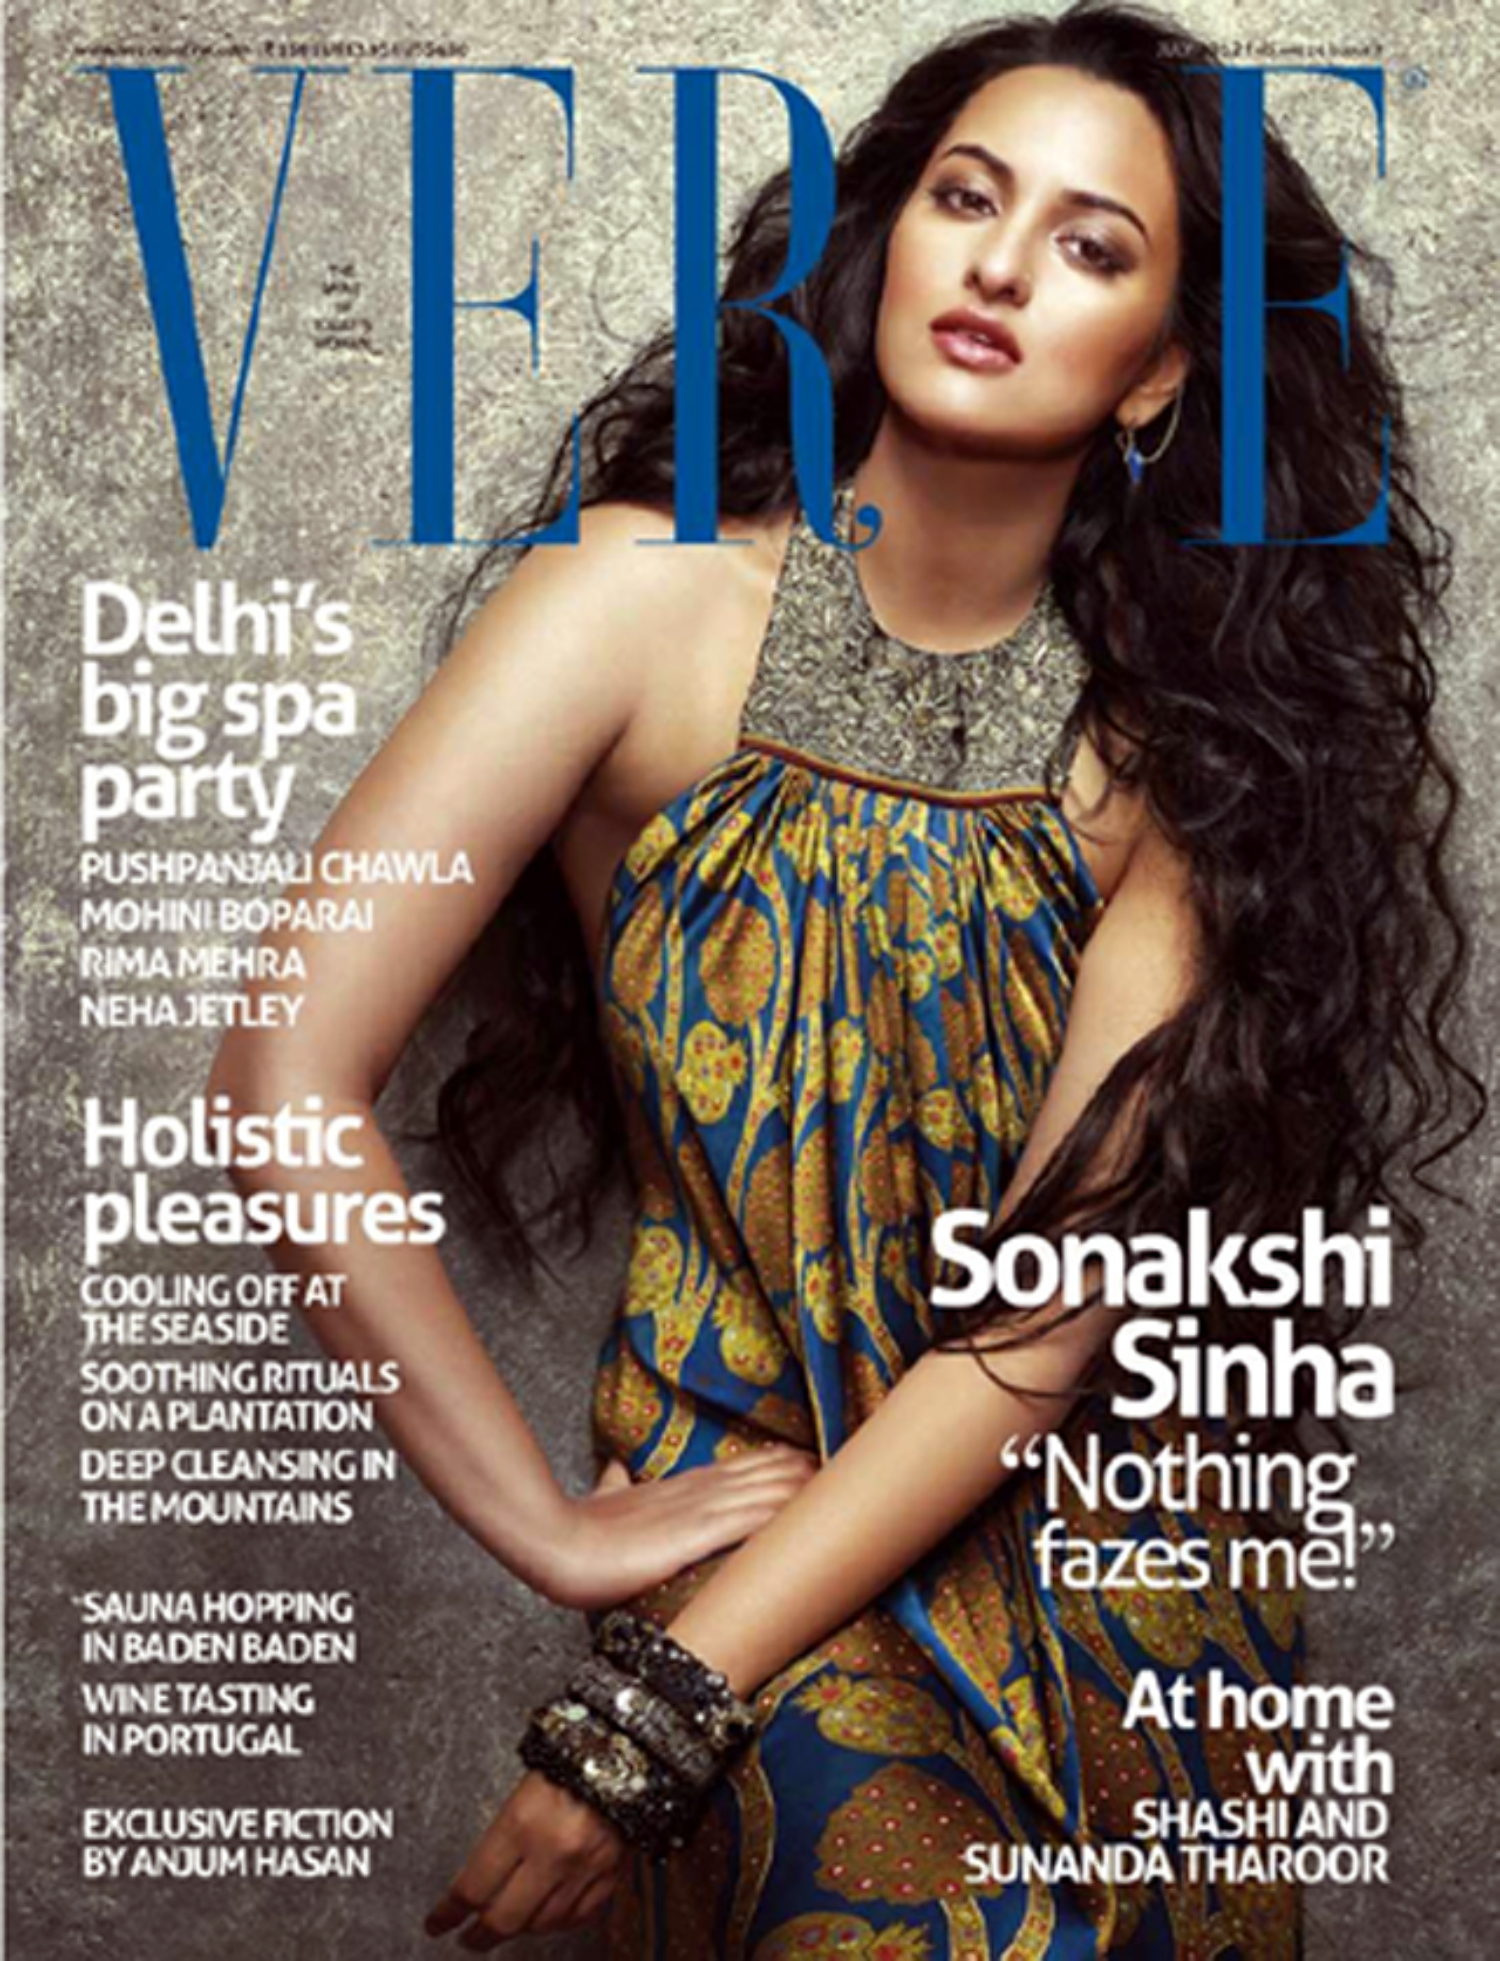 Sonakshi Sinha Verve India Magazine Cover Page Photo Sonakshi Sinha Photos Photo 16 From